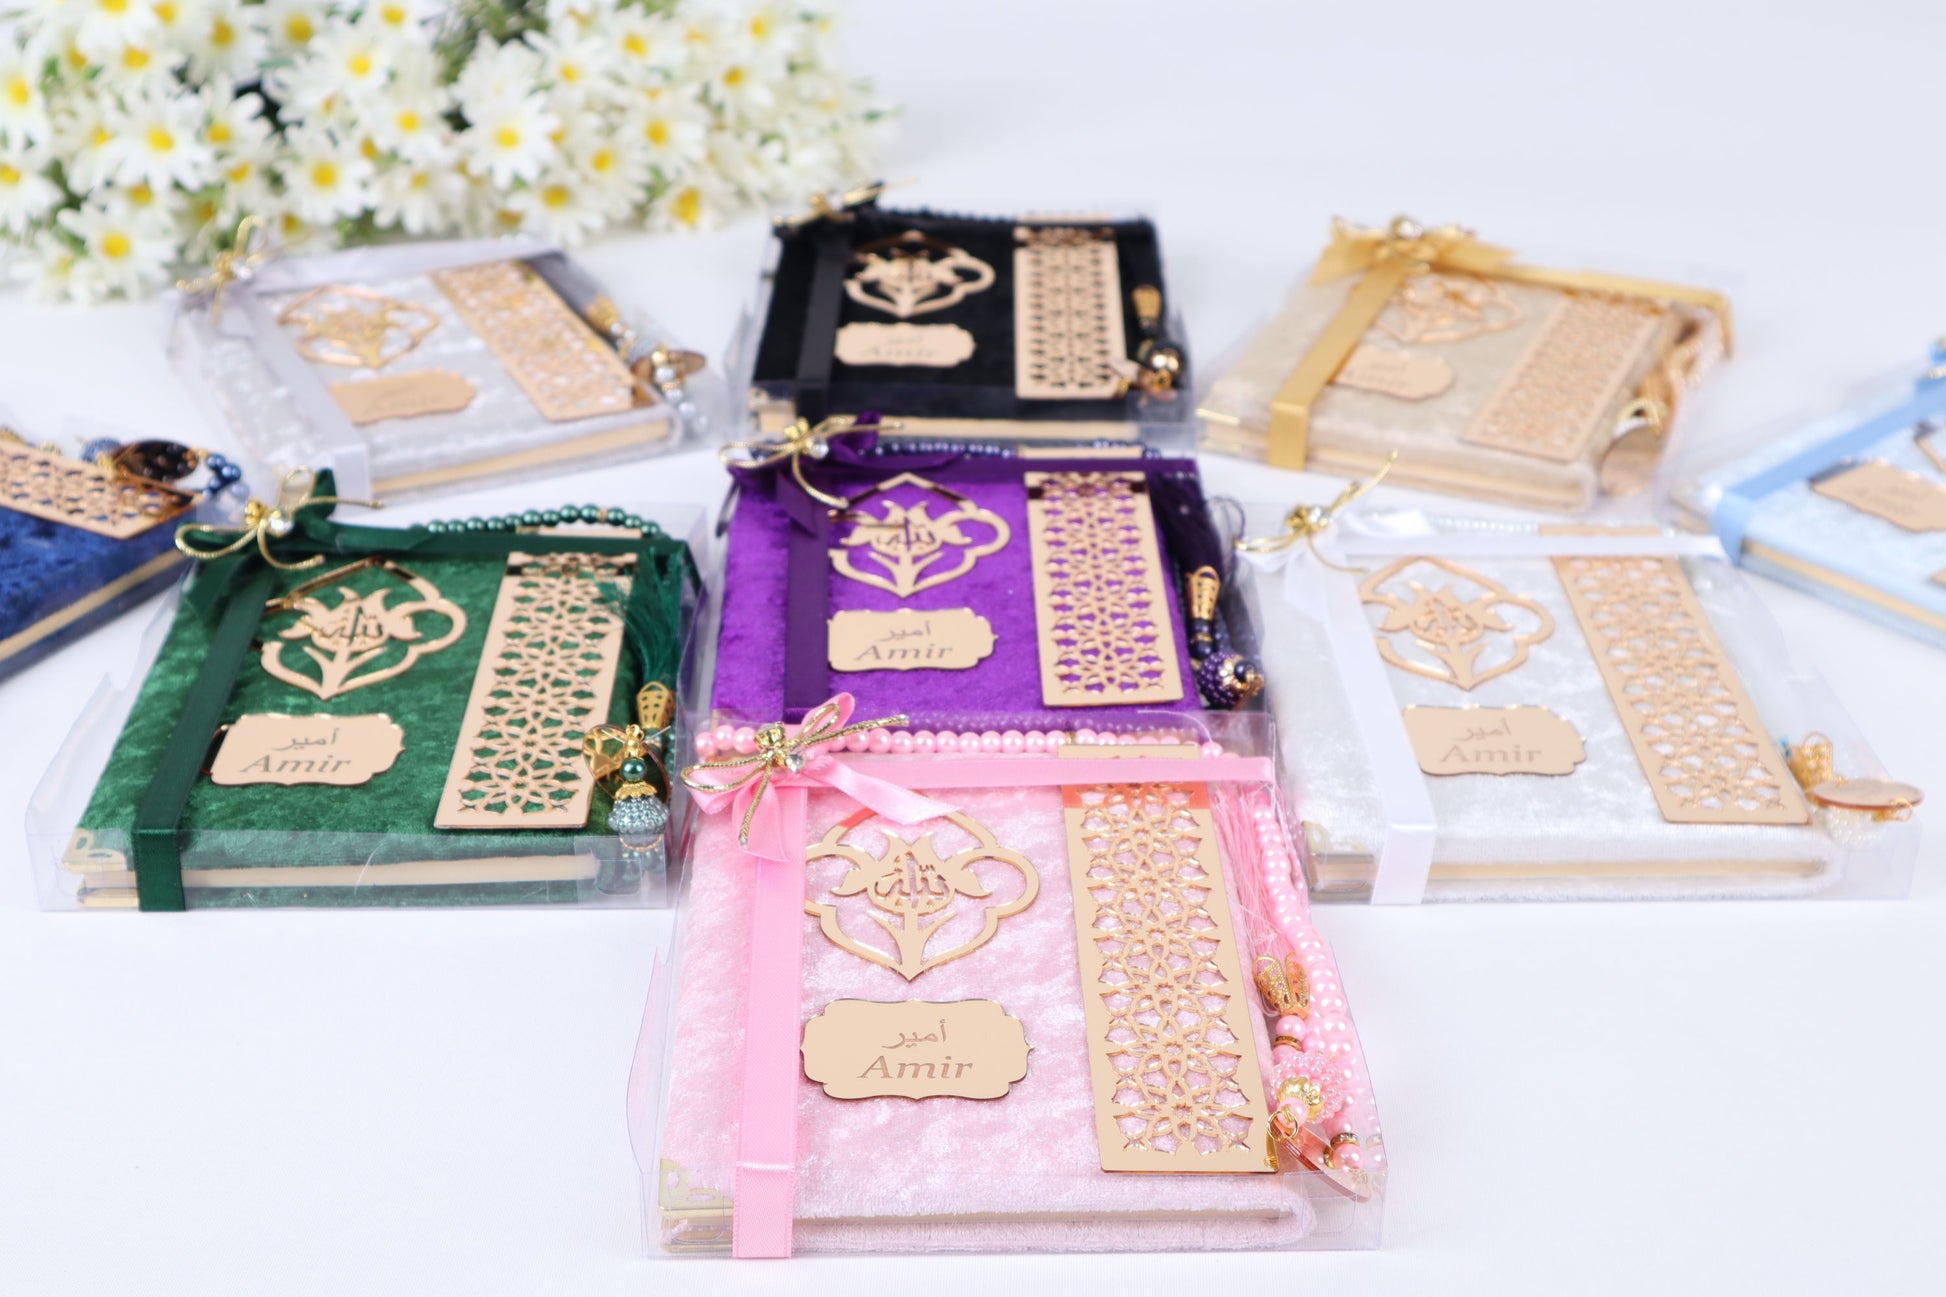 Personalized Islam Muslim Gift Set Velvet Dua Book Pearl Tasbeeh - Islamic Elite Favors is a handmade gift shop offering a wide variety of unique and personalized gifts for all occasions. Whether you're looking for the perfect Ramadan, Eid, Hajj, wedding gift or something special for a birthday, baby shower or anniversary, we have something for everyone. High quality, made with love.